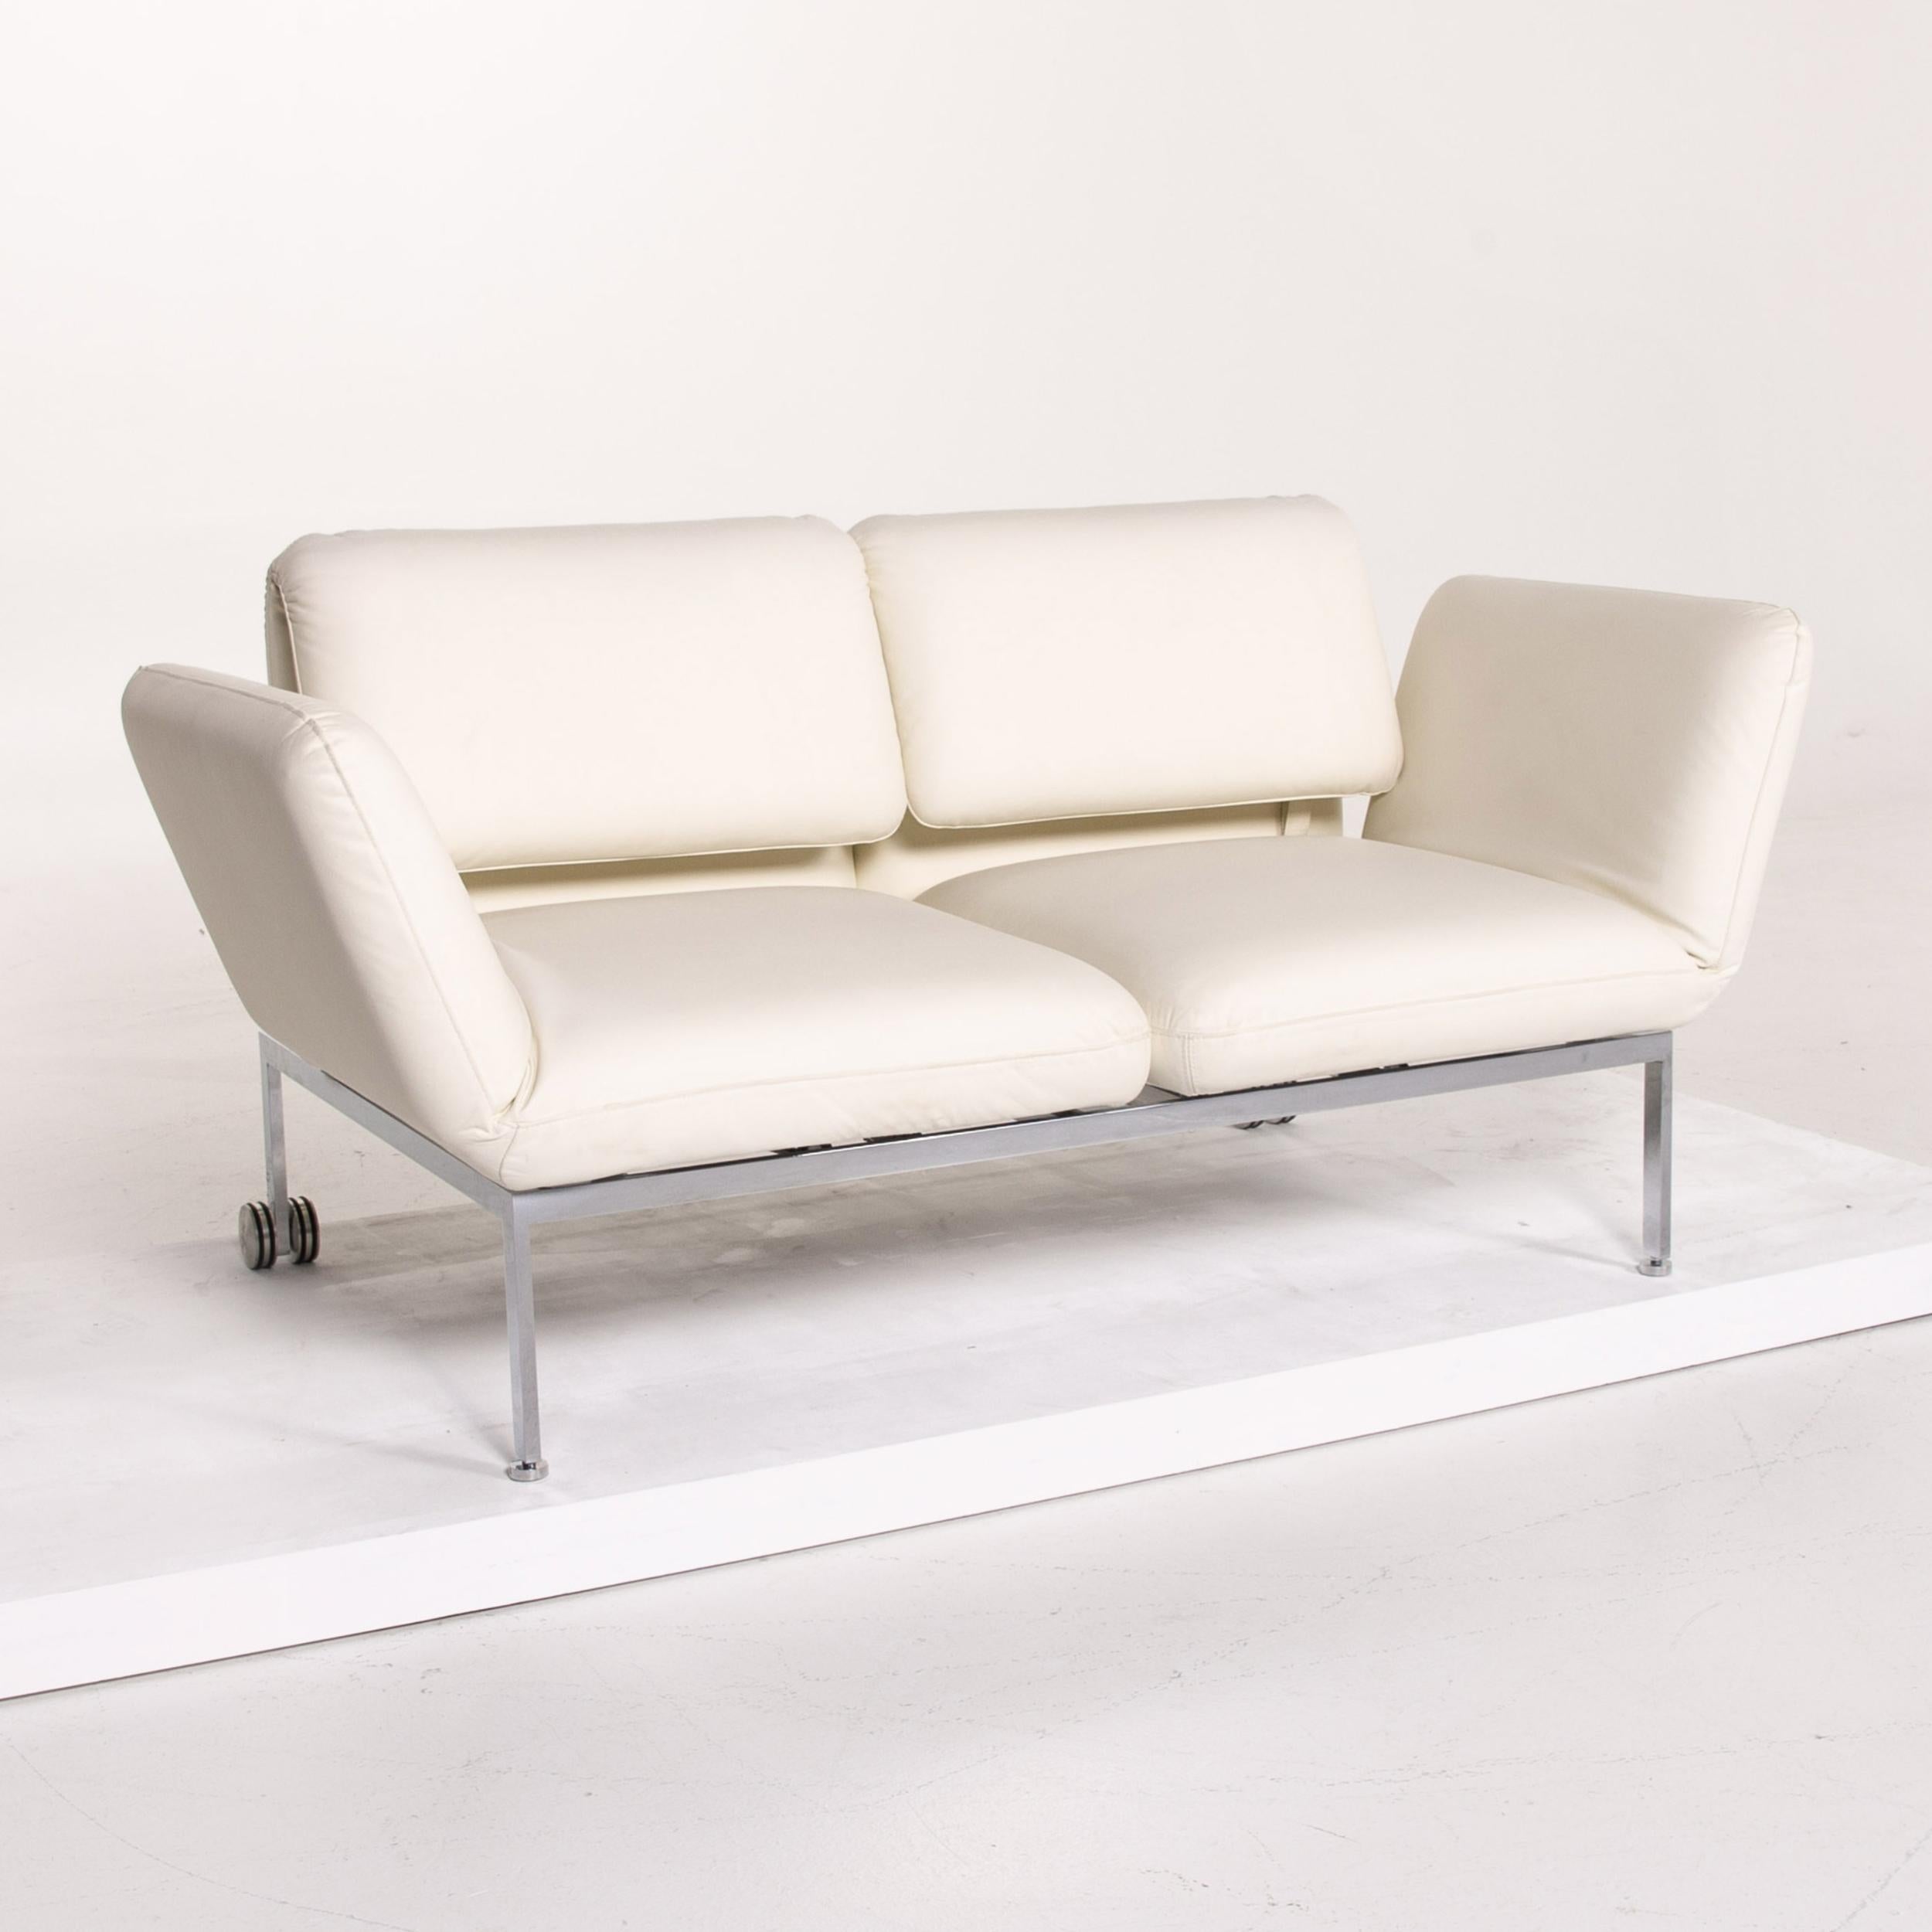 Brühl & Sippold Roro Leather Sofa White Two-Seat Function Sleeping Function For Sale 5